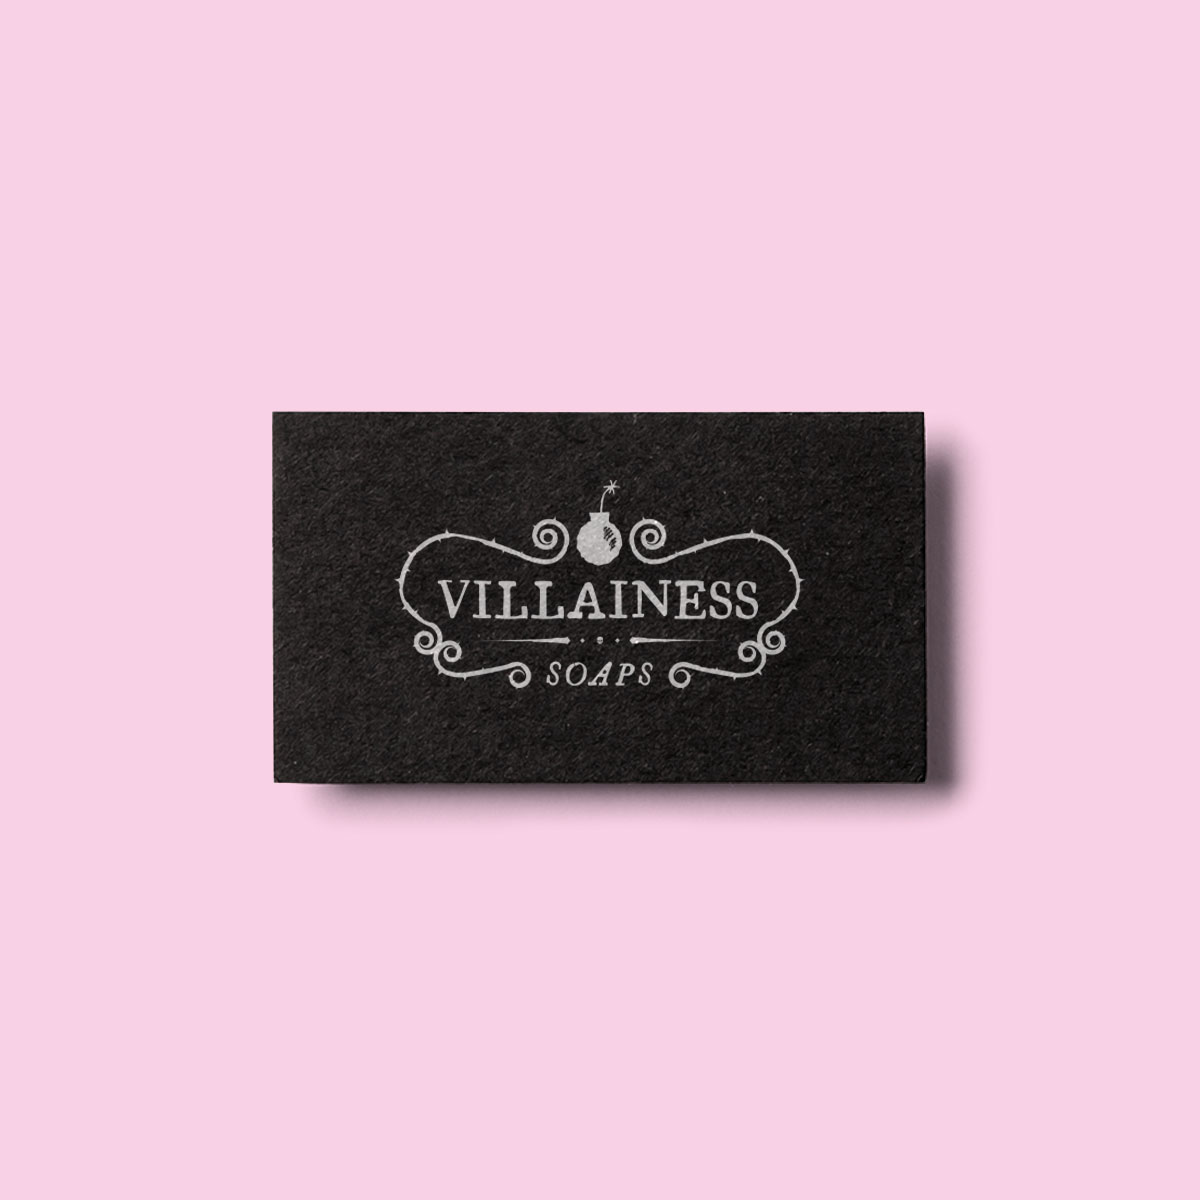 Villainess Soaps Brand and Identity Design